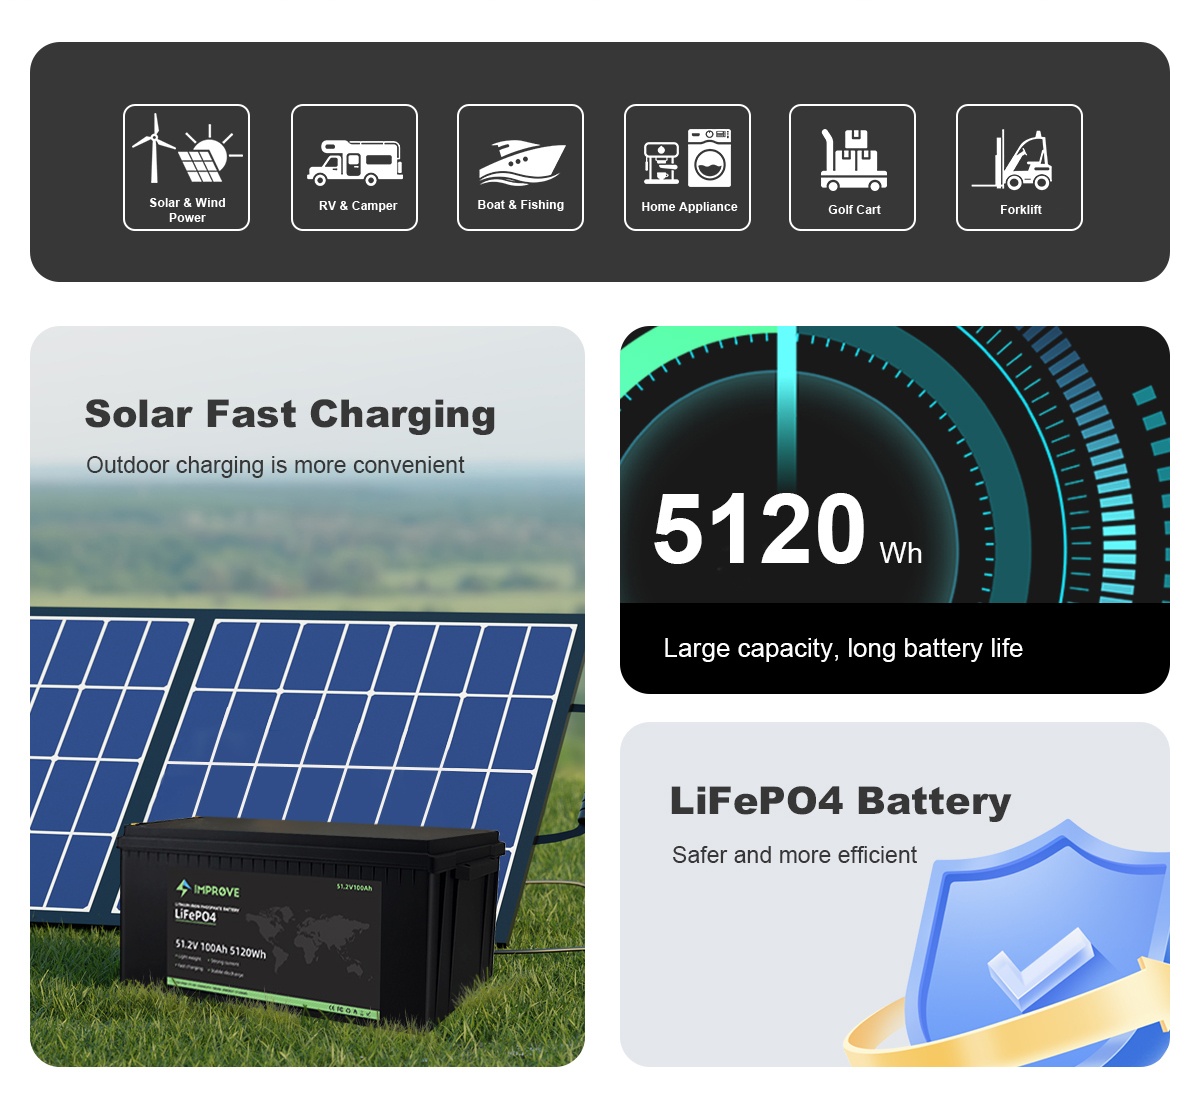 5120Wh Solar Fast Charging